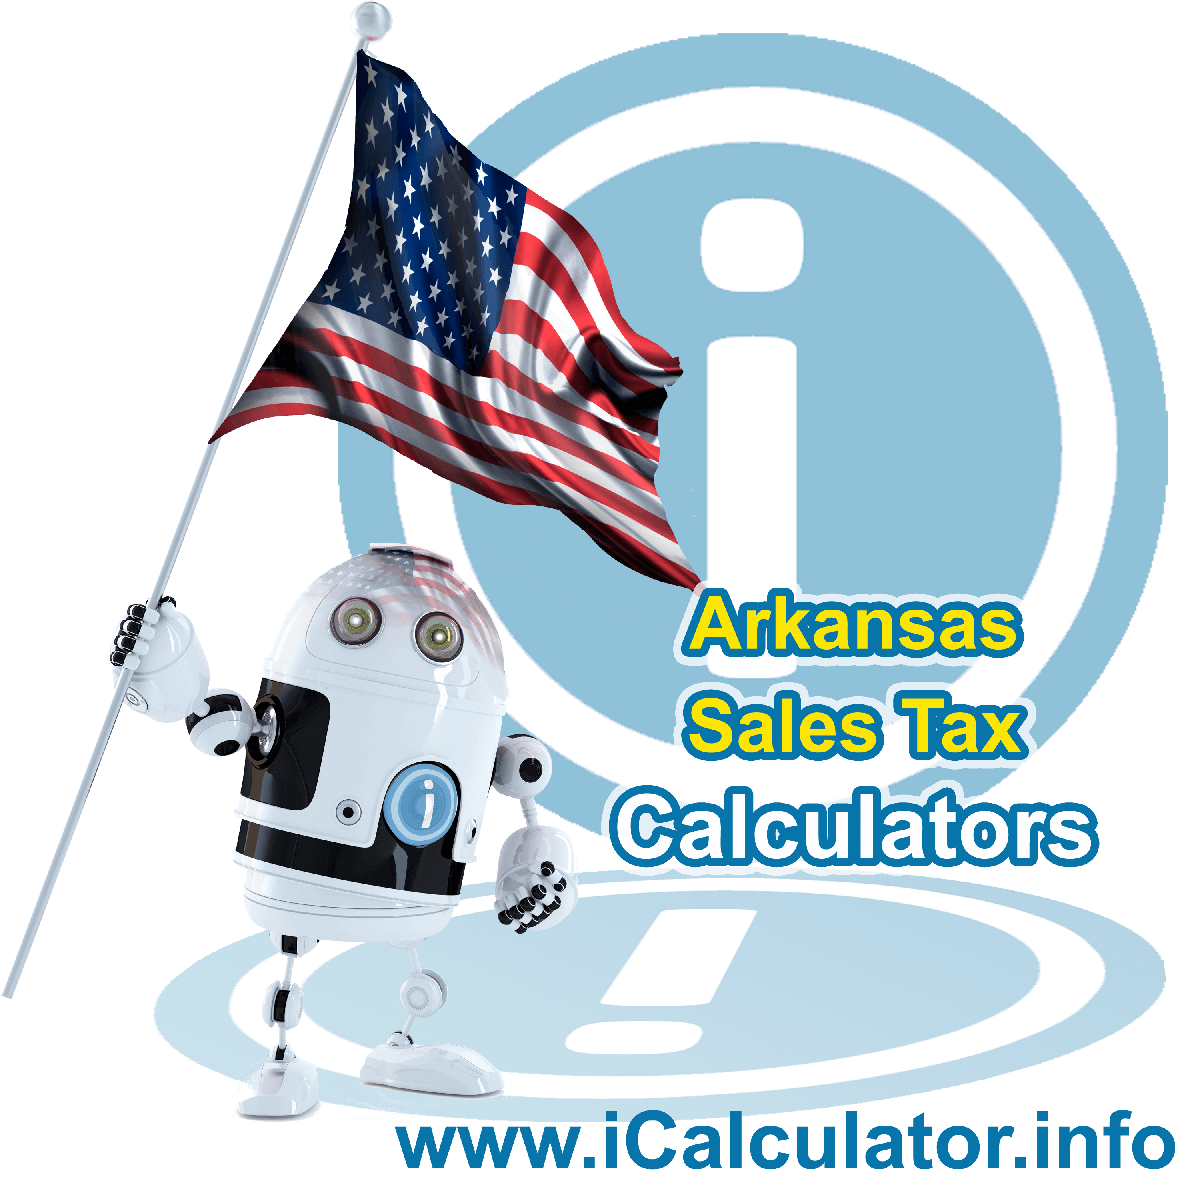 Polk County Sales Rates: This image illustrates a calculator robot calculating Polk County sales tax manually using the Polk County Sales Tax Formula. You can use this information to calculate Polk County Sales Tax manually or use the Polk County Sales Tax Calculator to calculate sales tax online.